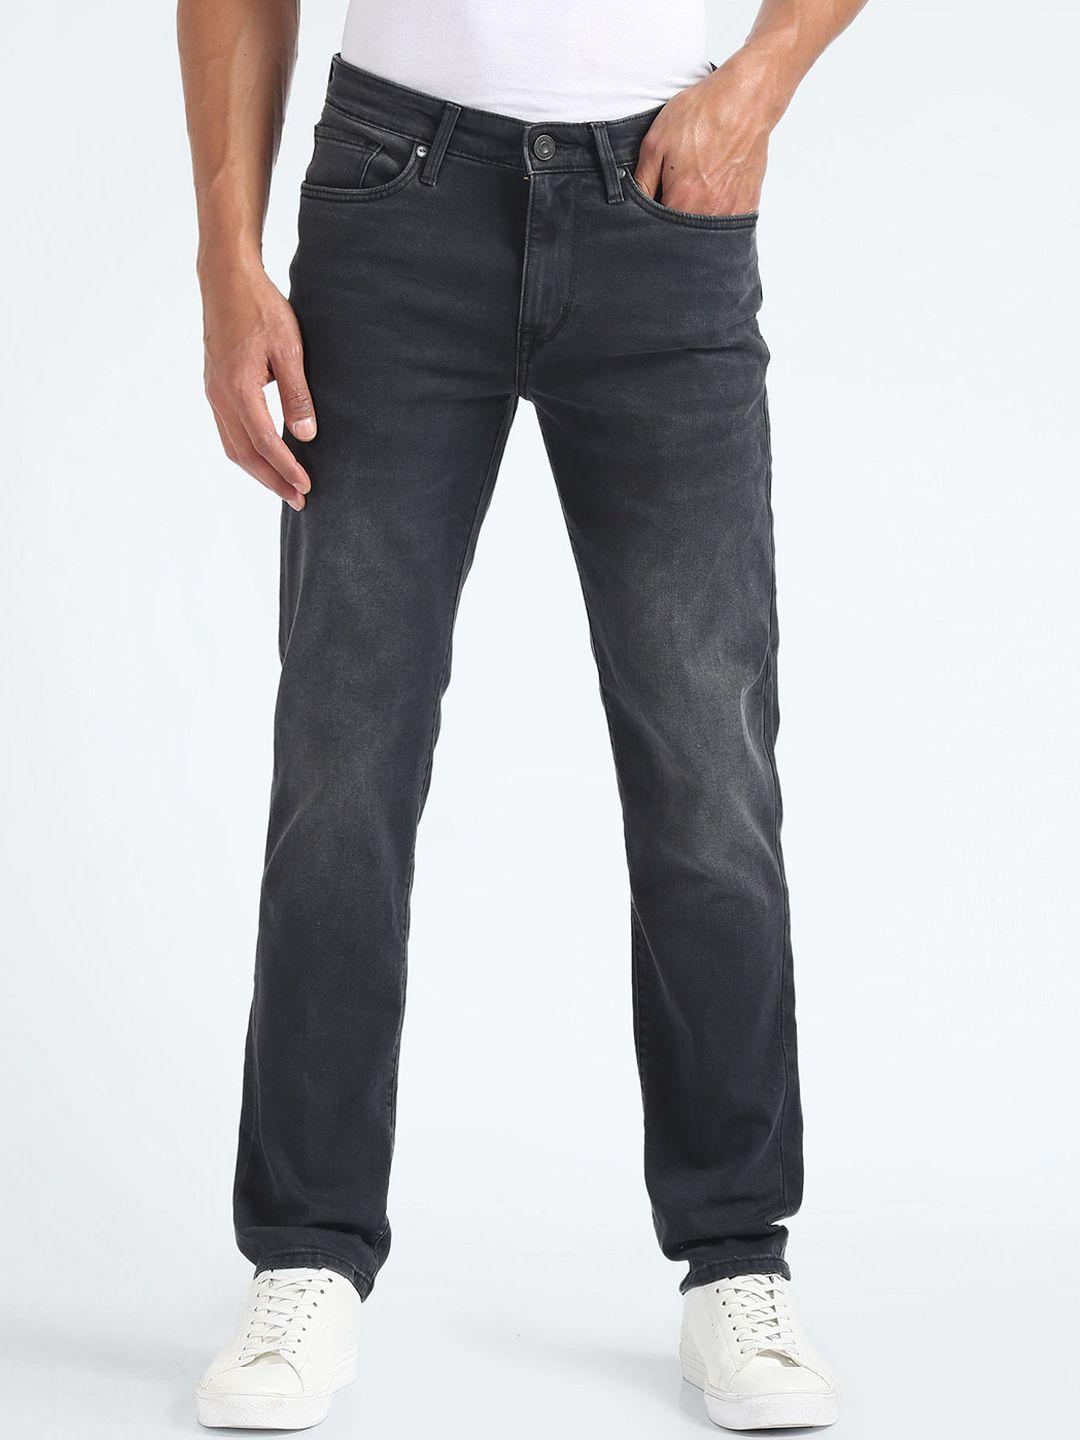 flying-machine-men-straight-fit-light-fade-stretchable-jeans